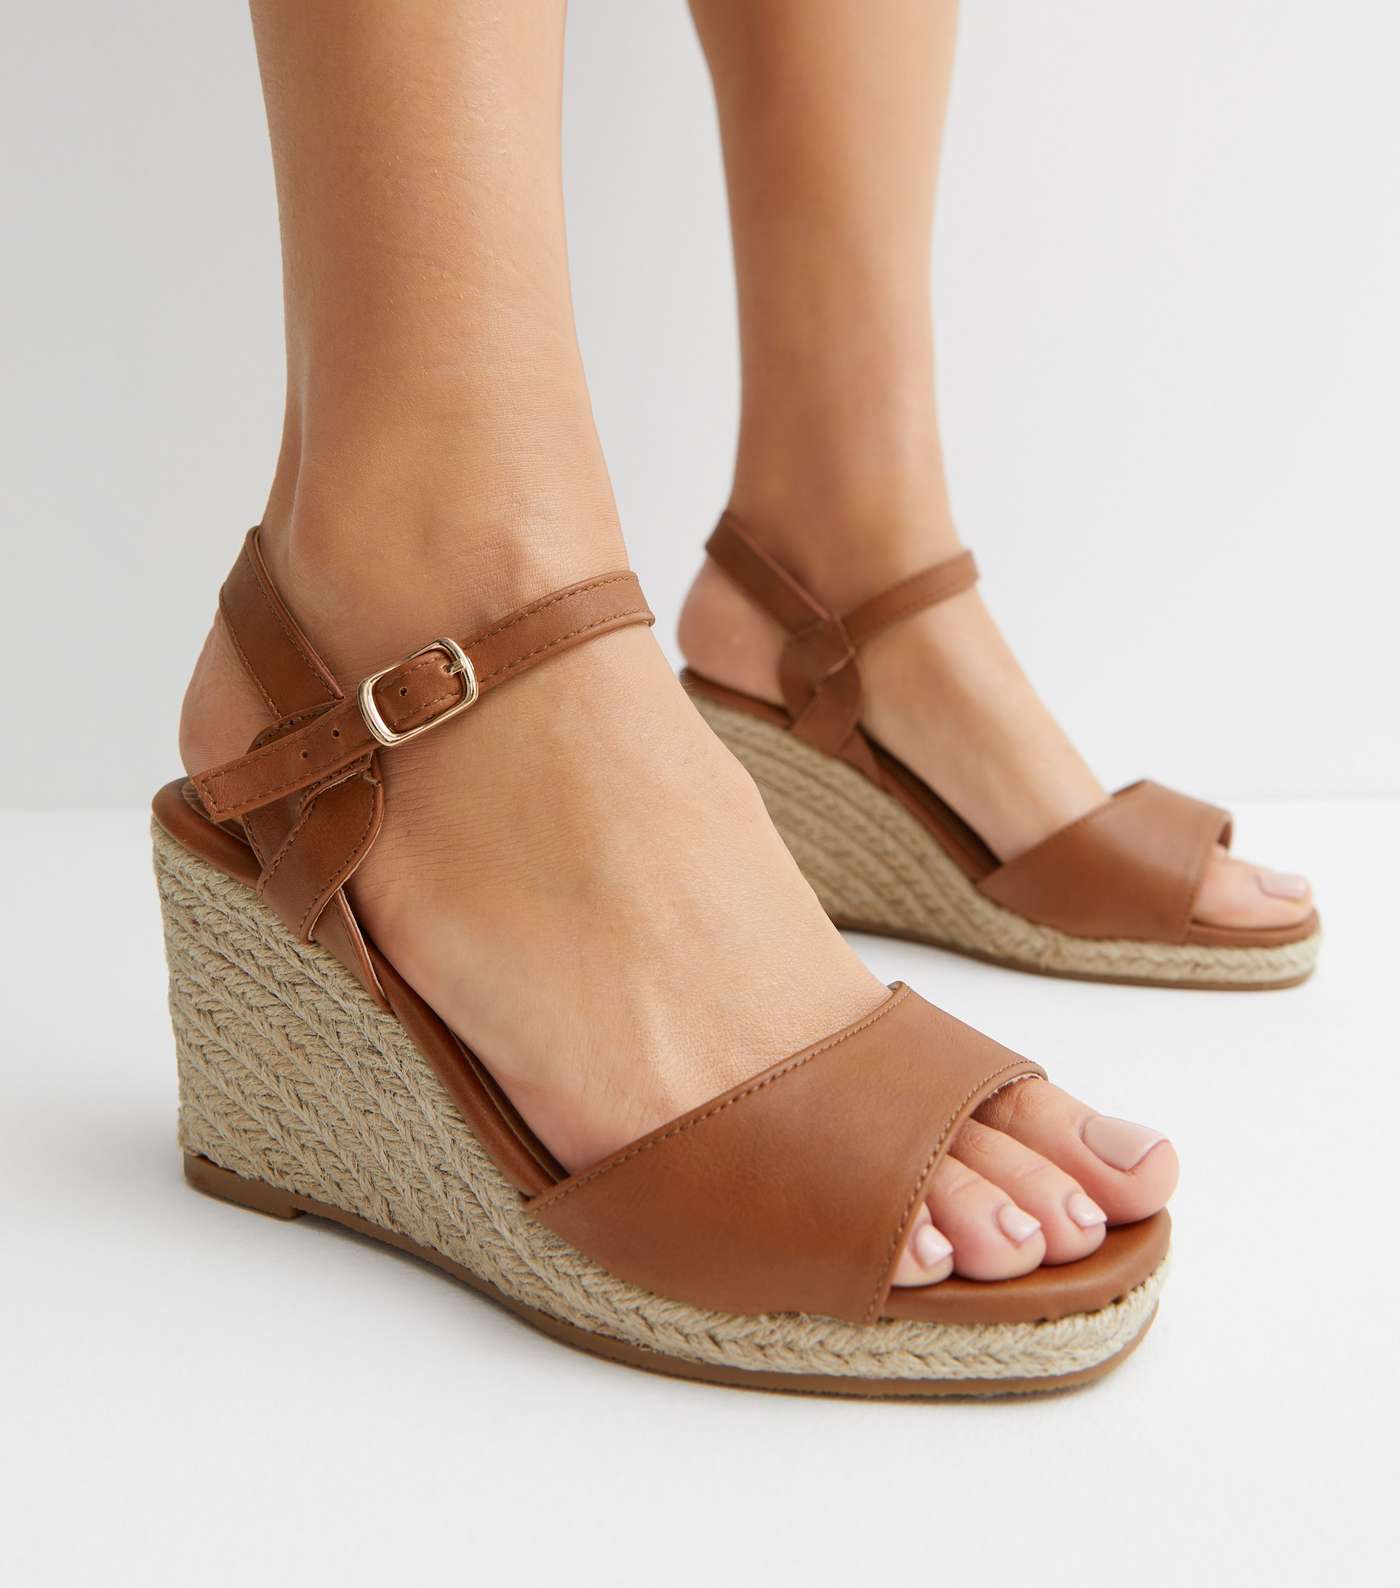 Wide Fit Tan Leather-Look Espadrille Wedge Sandals Image 2